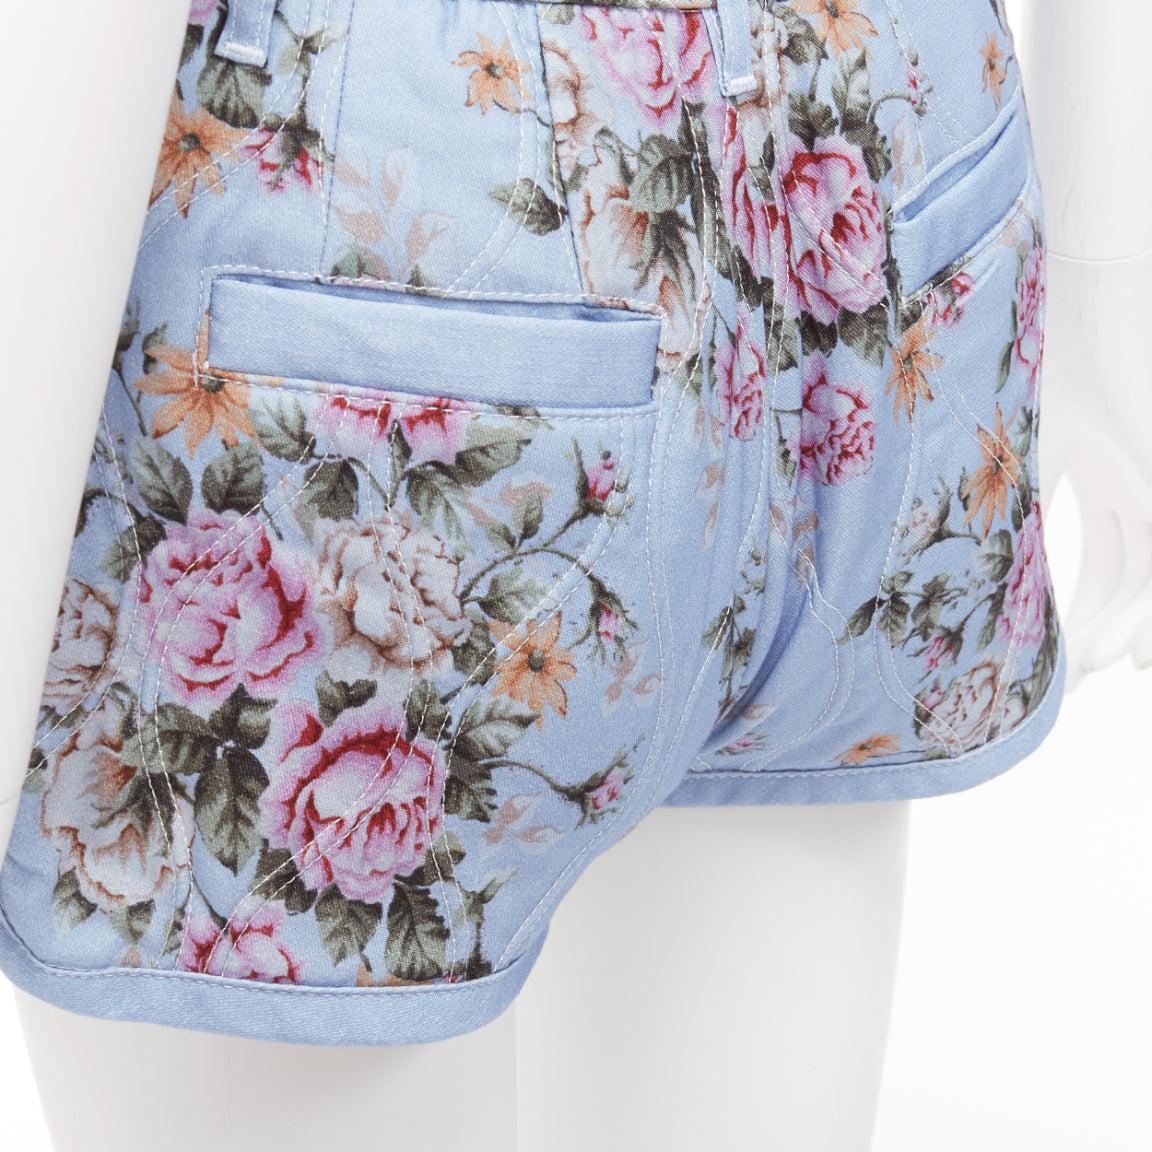 DSQUARED2 blue vintage floral quilted cotton blend high waisted bloomer shorts IT36 S
Reference: AAWC/A00865
Brand: Dsquared2
Material: Cotton, Blend
Color: Blue, Pink
Pattern: Floral
Closure: Zip Fly
Lining: Cream Fabric
Made in: